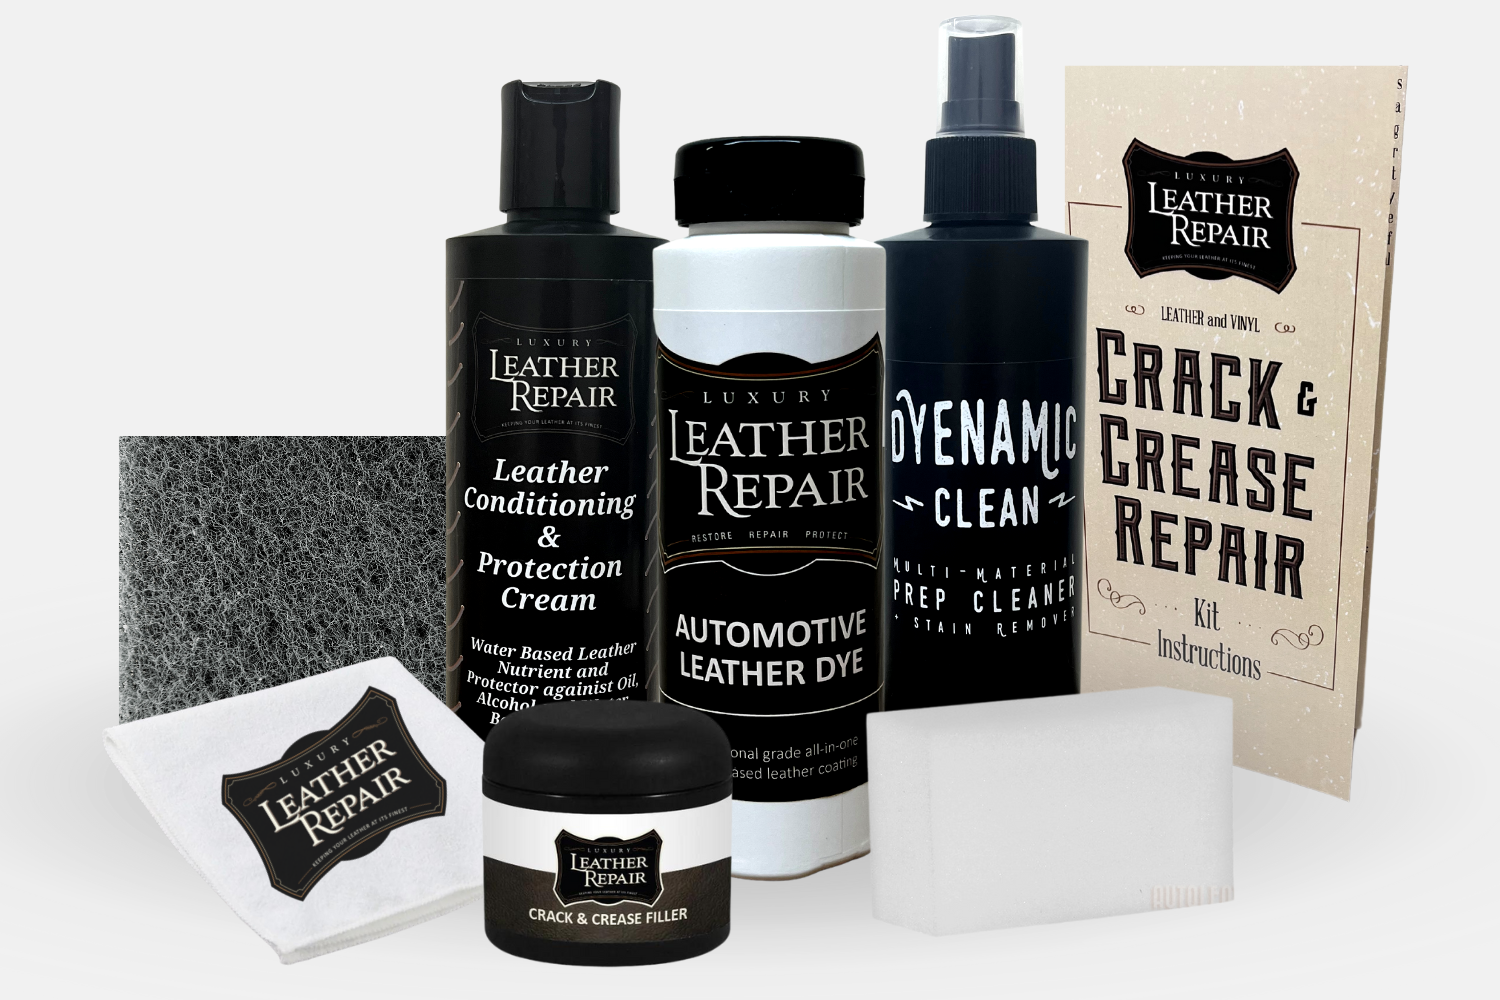 Leather Repair Trick for Small Tears & Cracks 